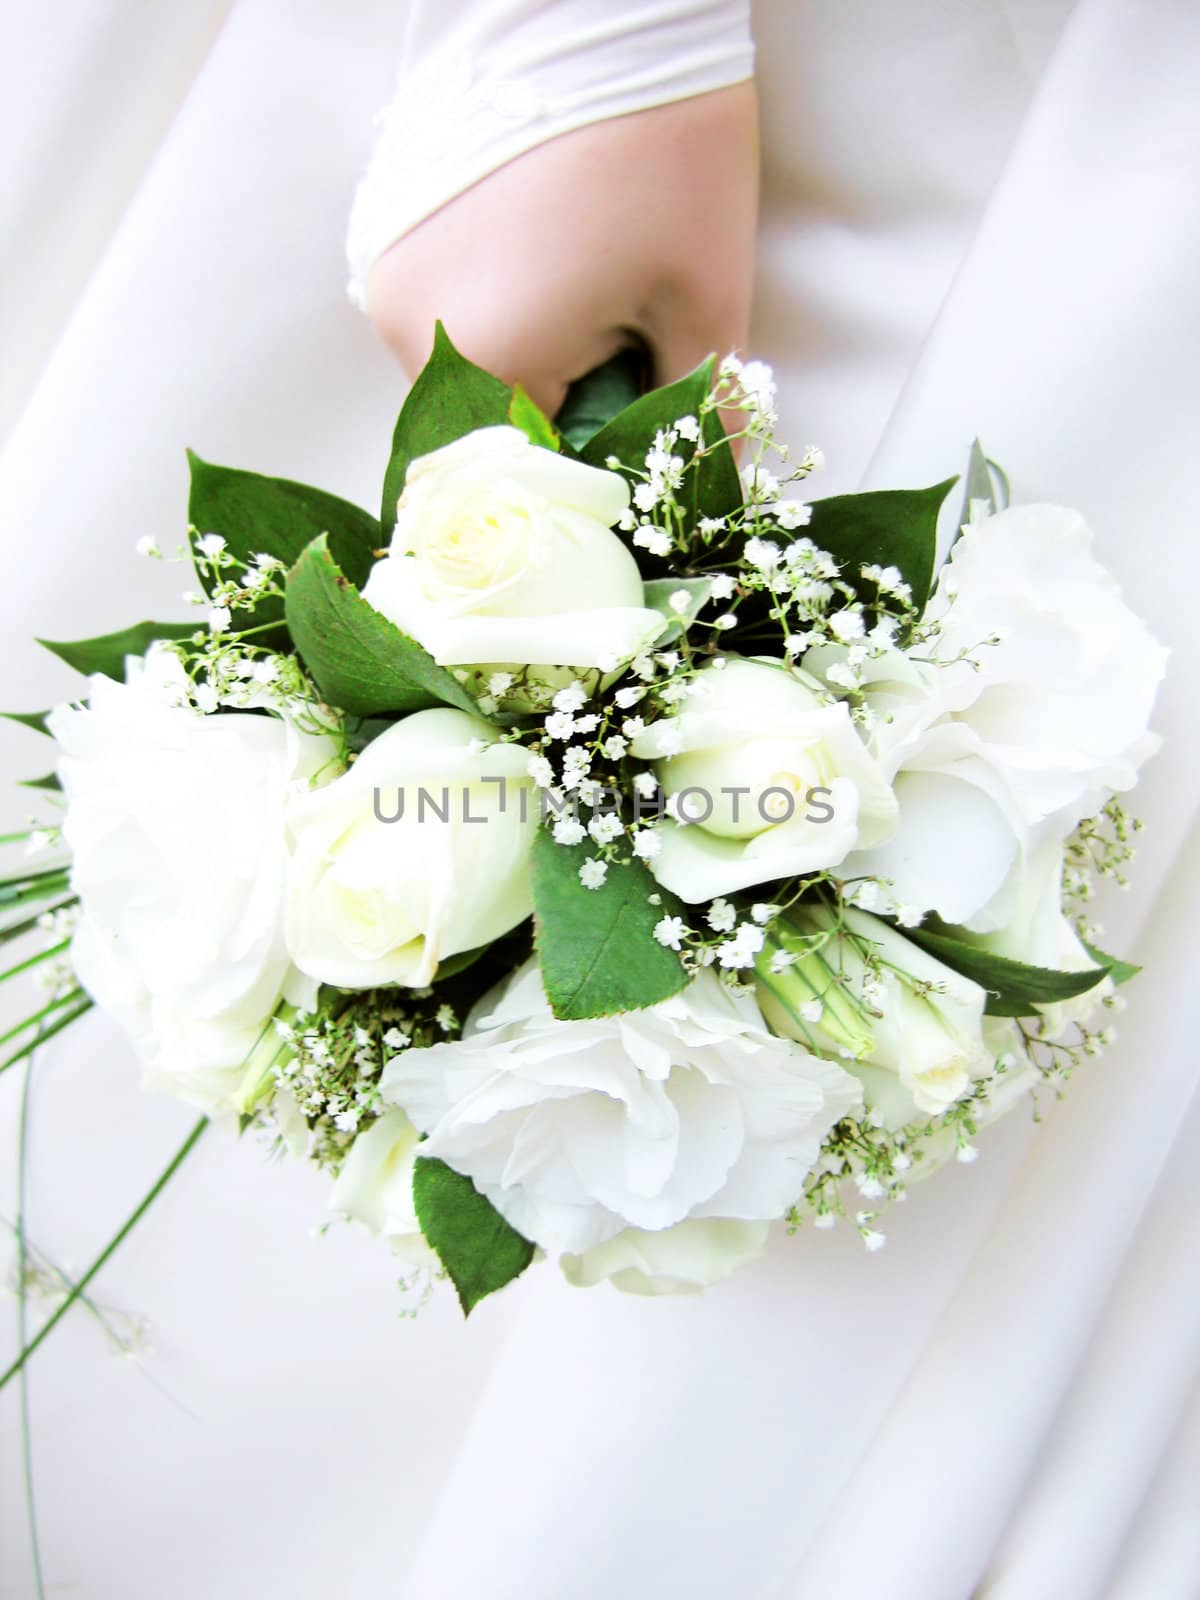 wedding bouquet of white roses in hand of the bride